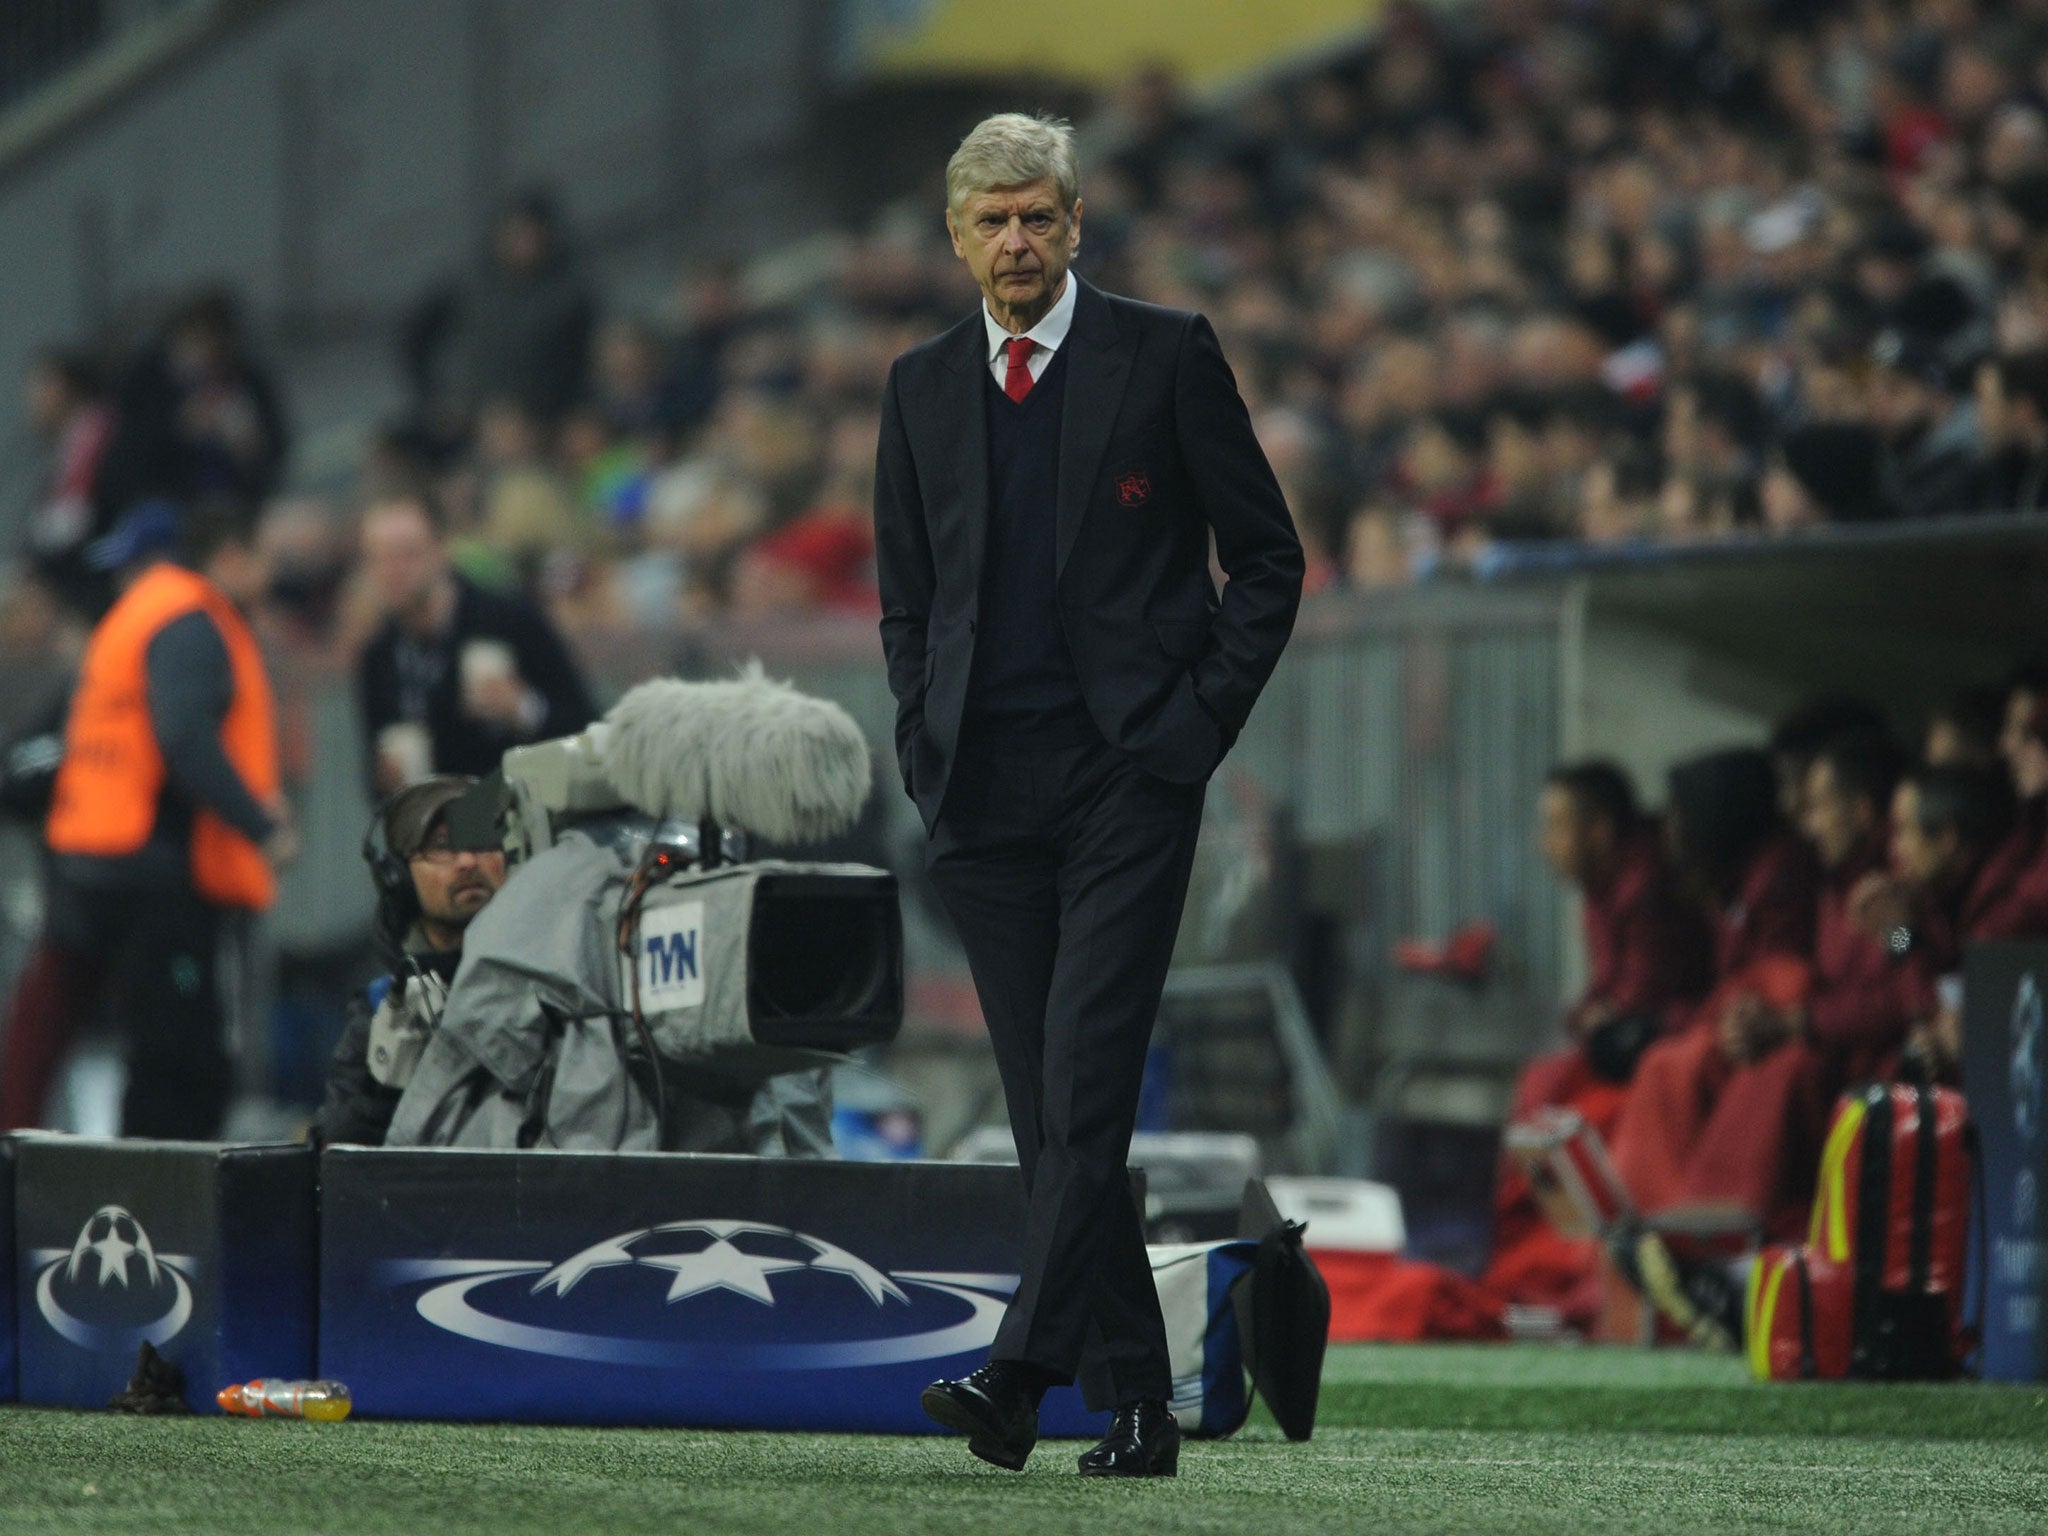 Arsene Wenger played 17 Champions League matches before arriving at Arsenal, compared to the club's 10